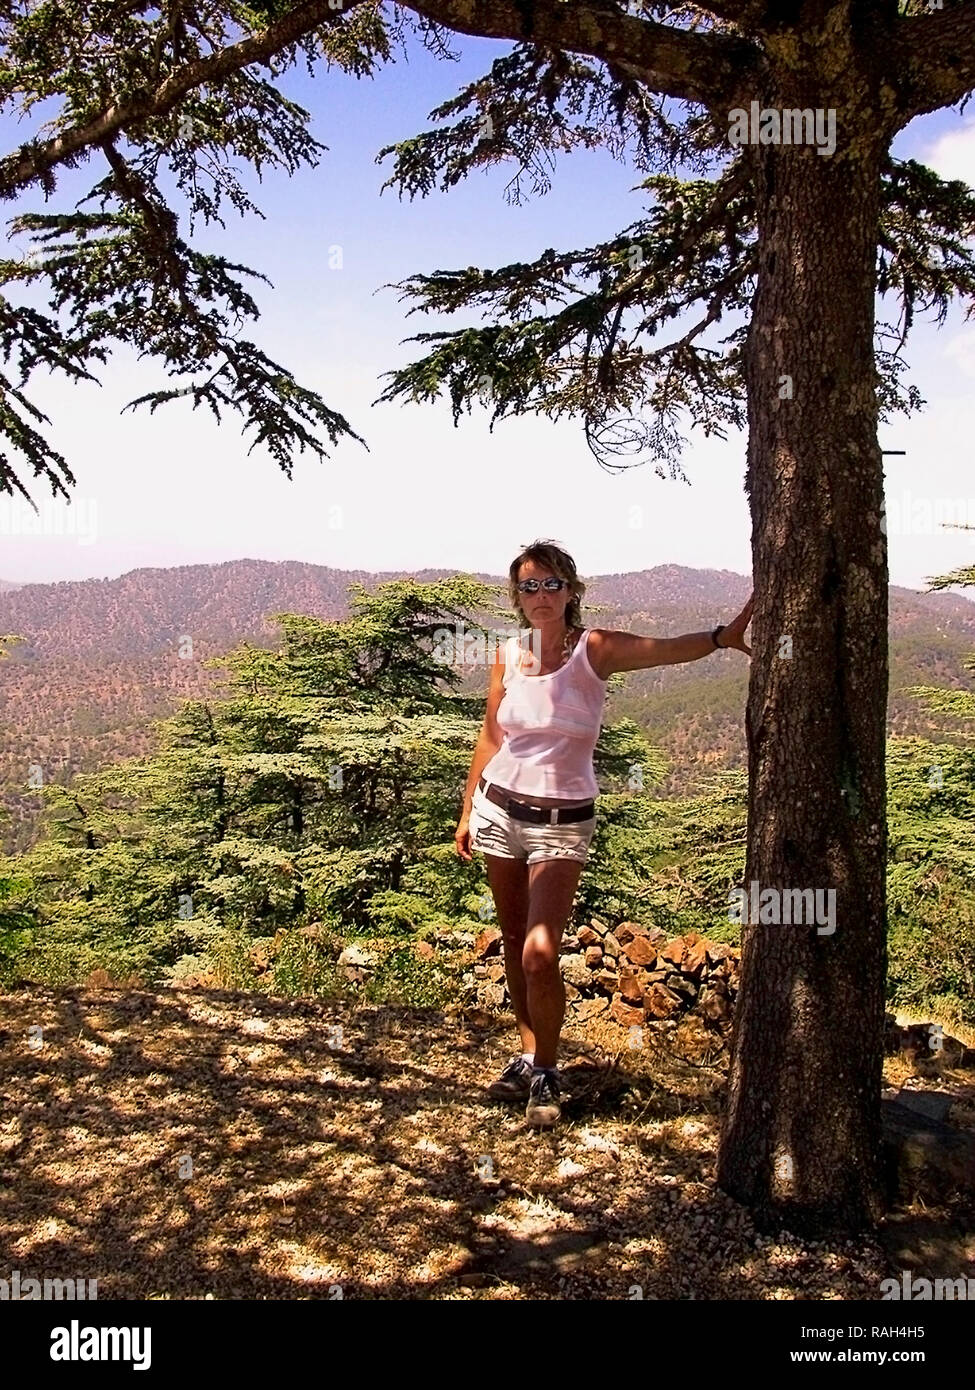 Female hiker at the top of Mount Tripylos, Tillyria, Cyprus: pine trees and dappled shade.  MODEL RELEASED Stock Photo